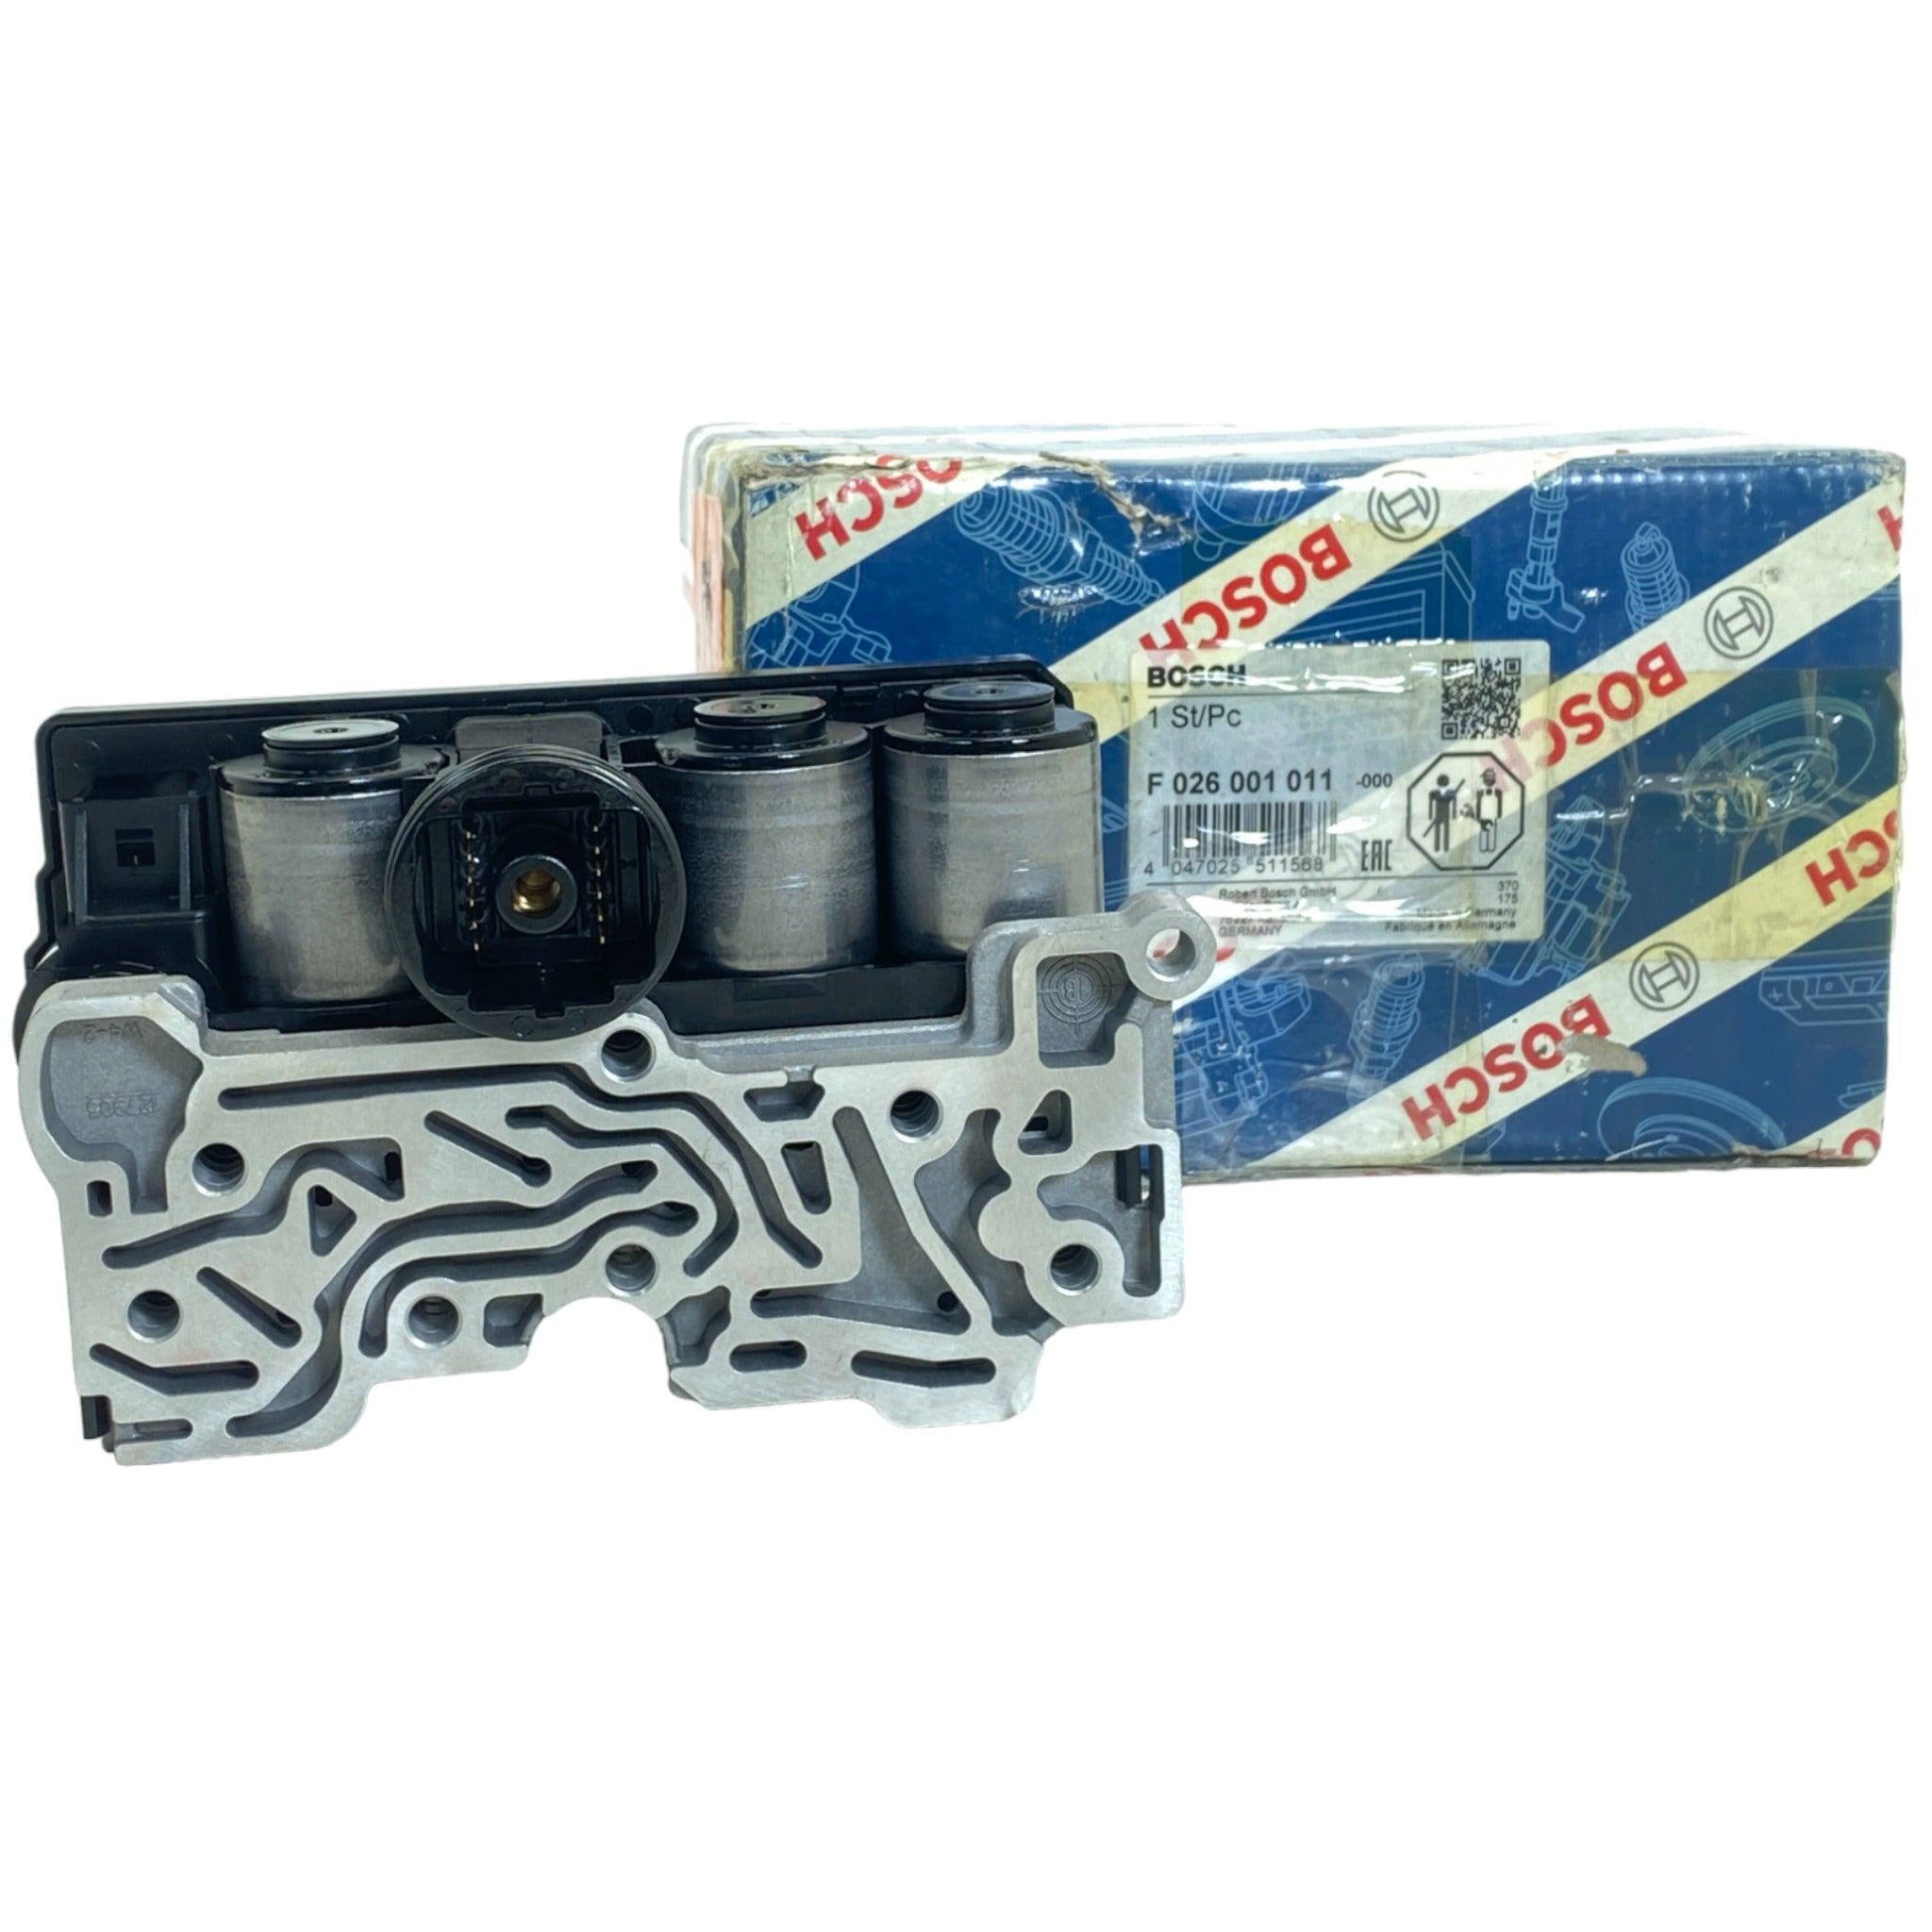 F026001011 Genuine Bosch Solenoid Block For Ford